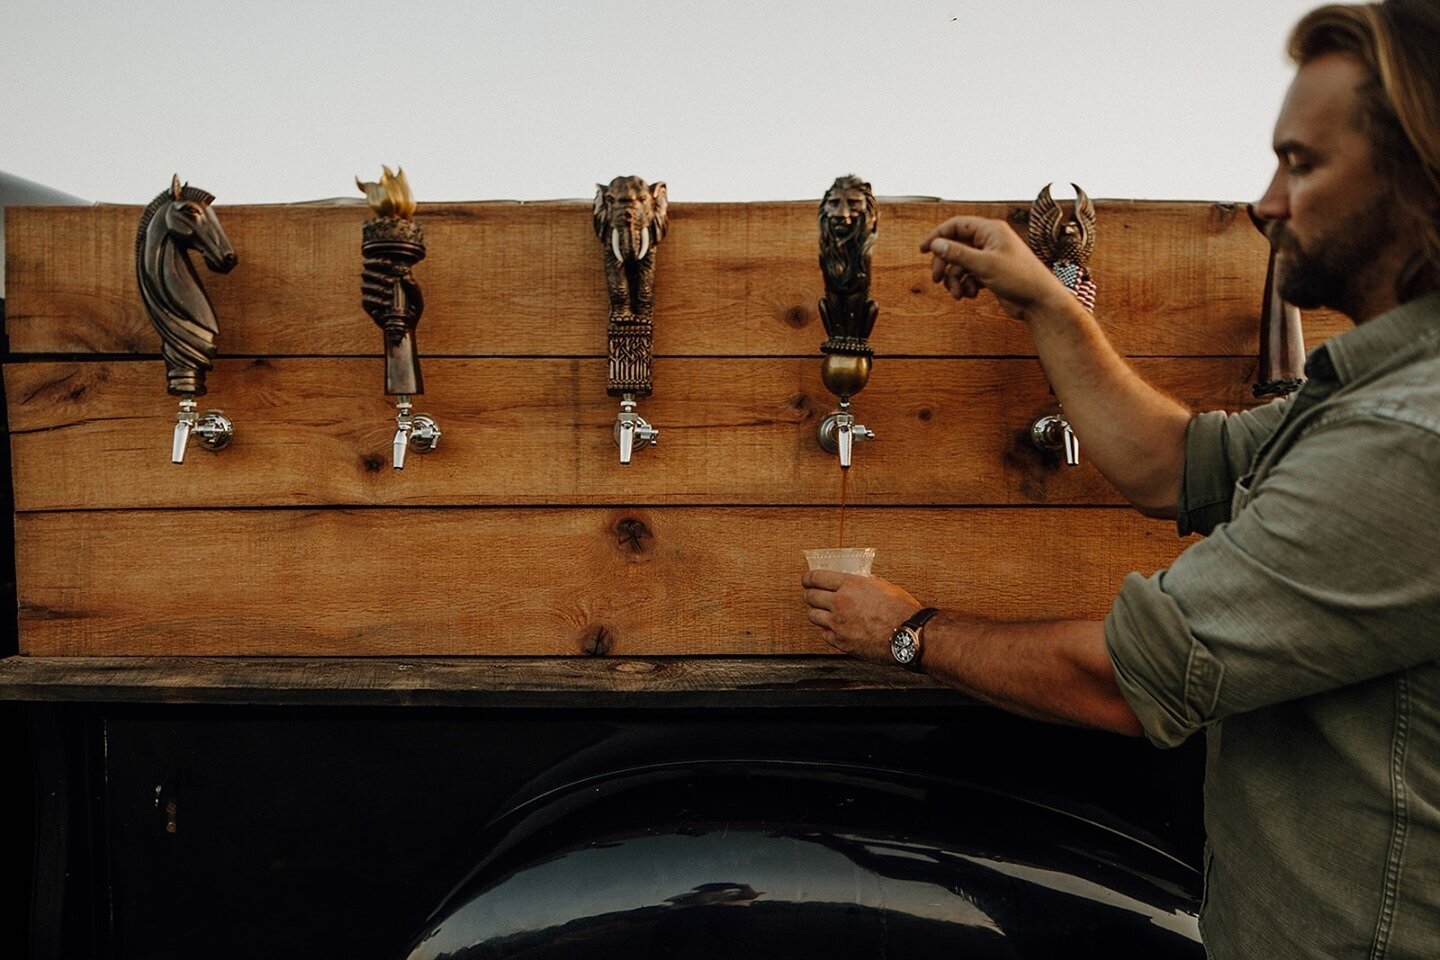 It's cliche but not all bar services are created equal. We host tastings, deliver kegs, and offer a darn good looking rig that WILL impress your guests. ⁠
⁠
@itsmelrey for the lovely photo